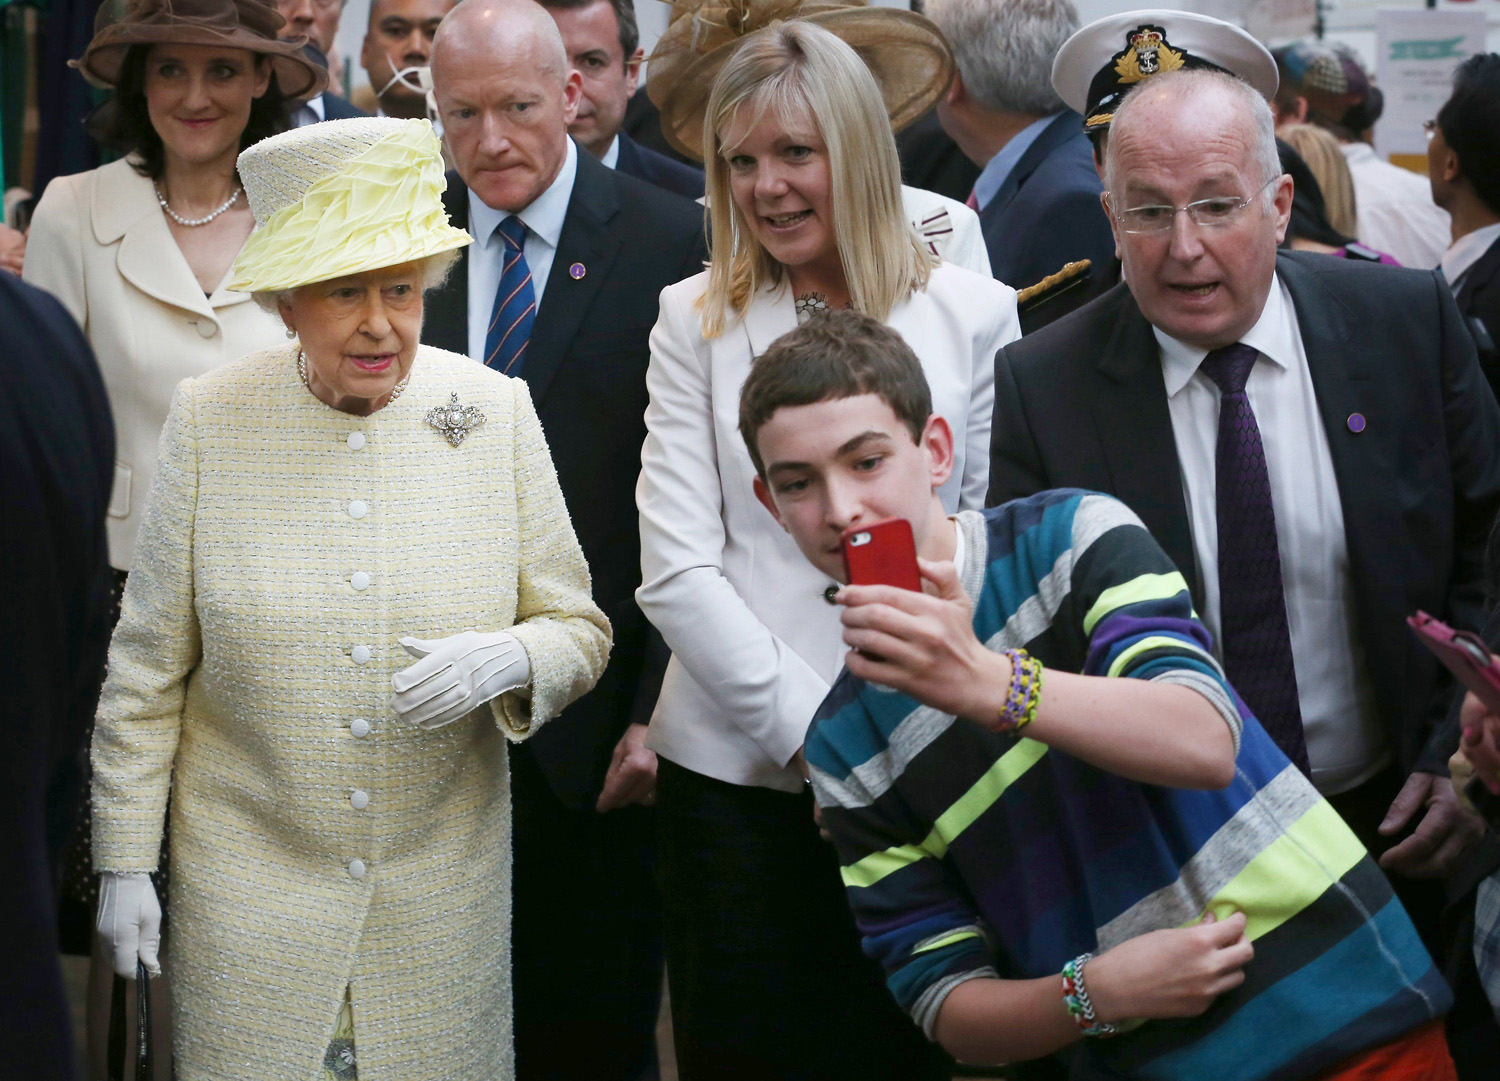 A local youth takes a selfie in front of Queen Elizabeth II during a visit to St George's indoor market in Belfast, Northern Ireland on June 24, 2014.